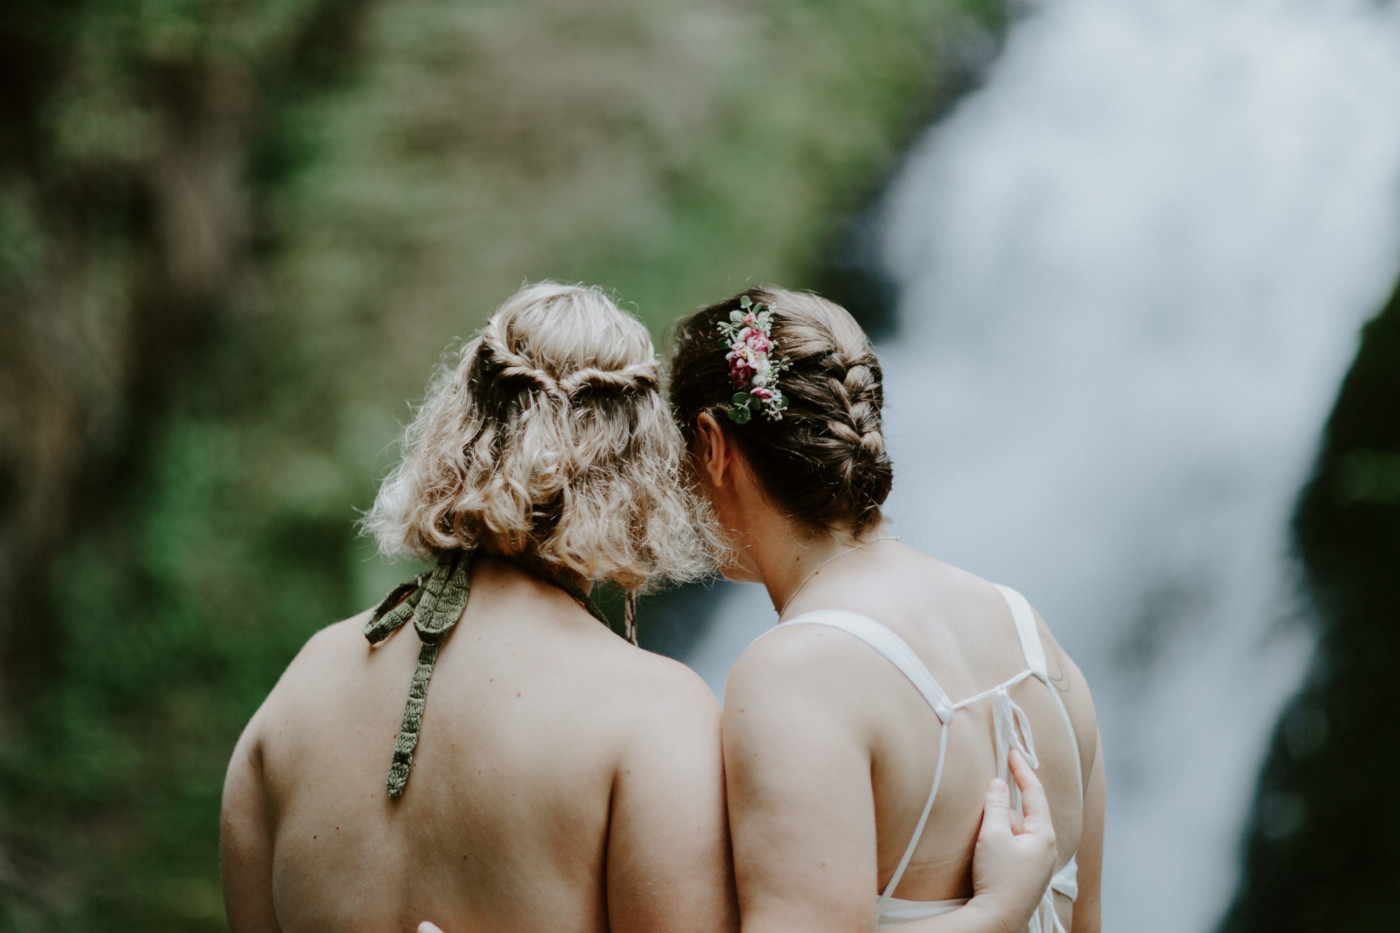 Kate and Audrey stand side by side. Elopement wedding photography at Bridal Veil Falls by Sienna Plus Josh.